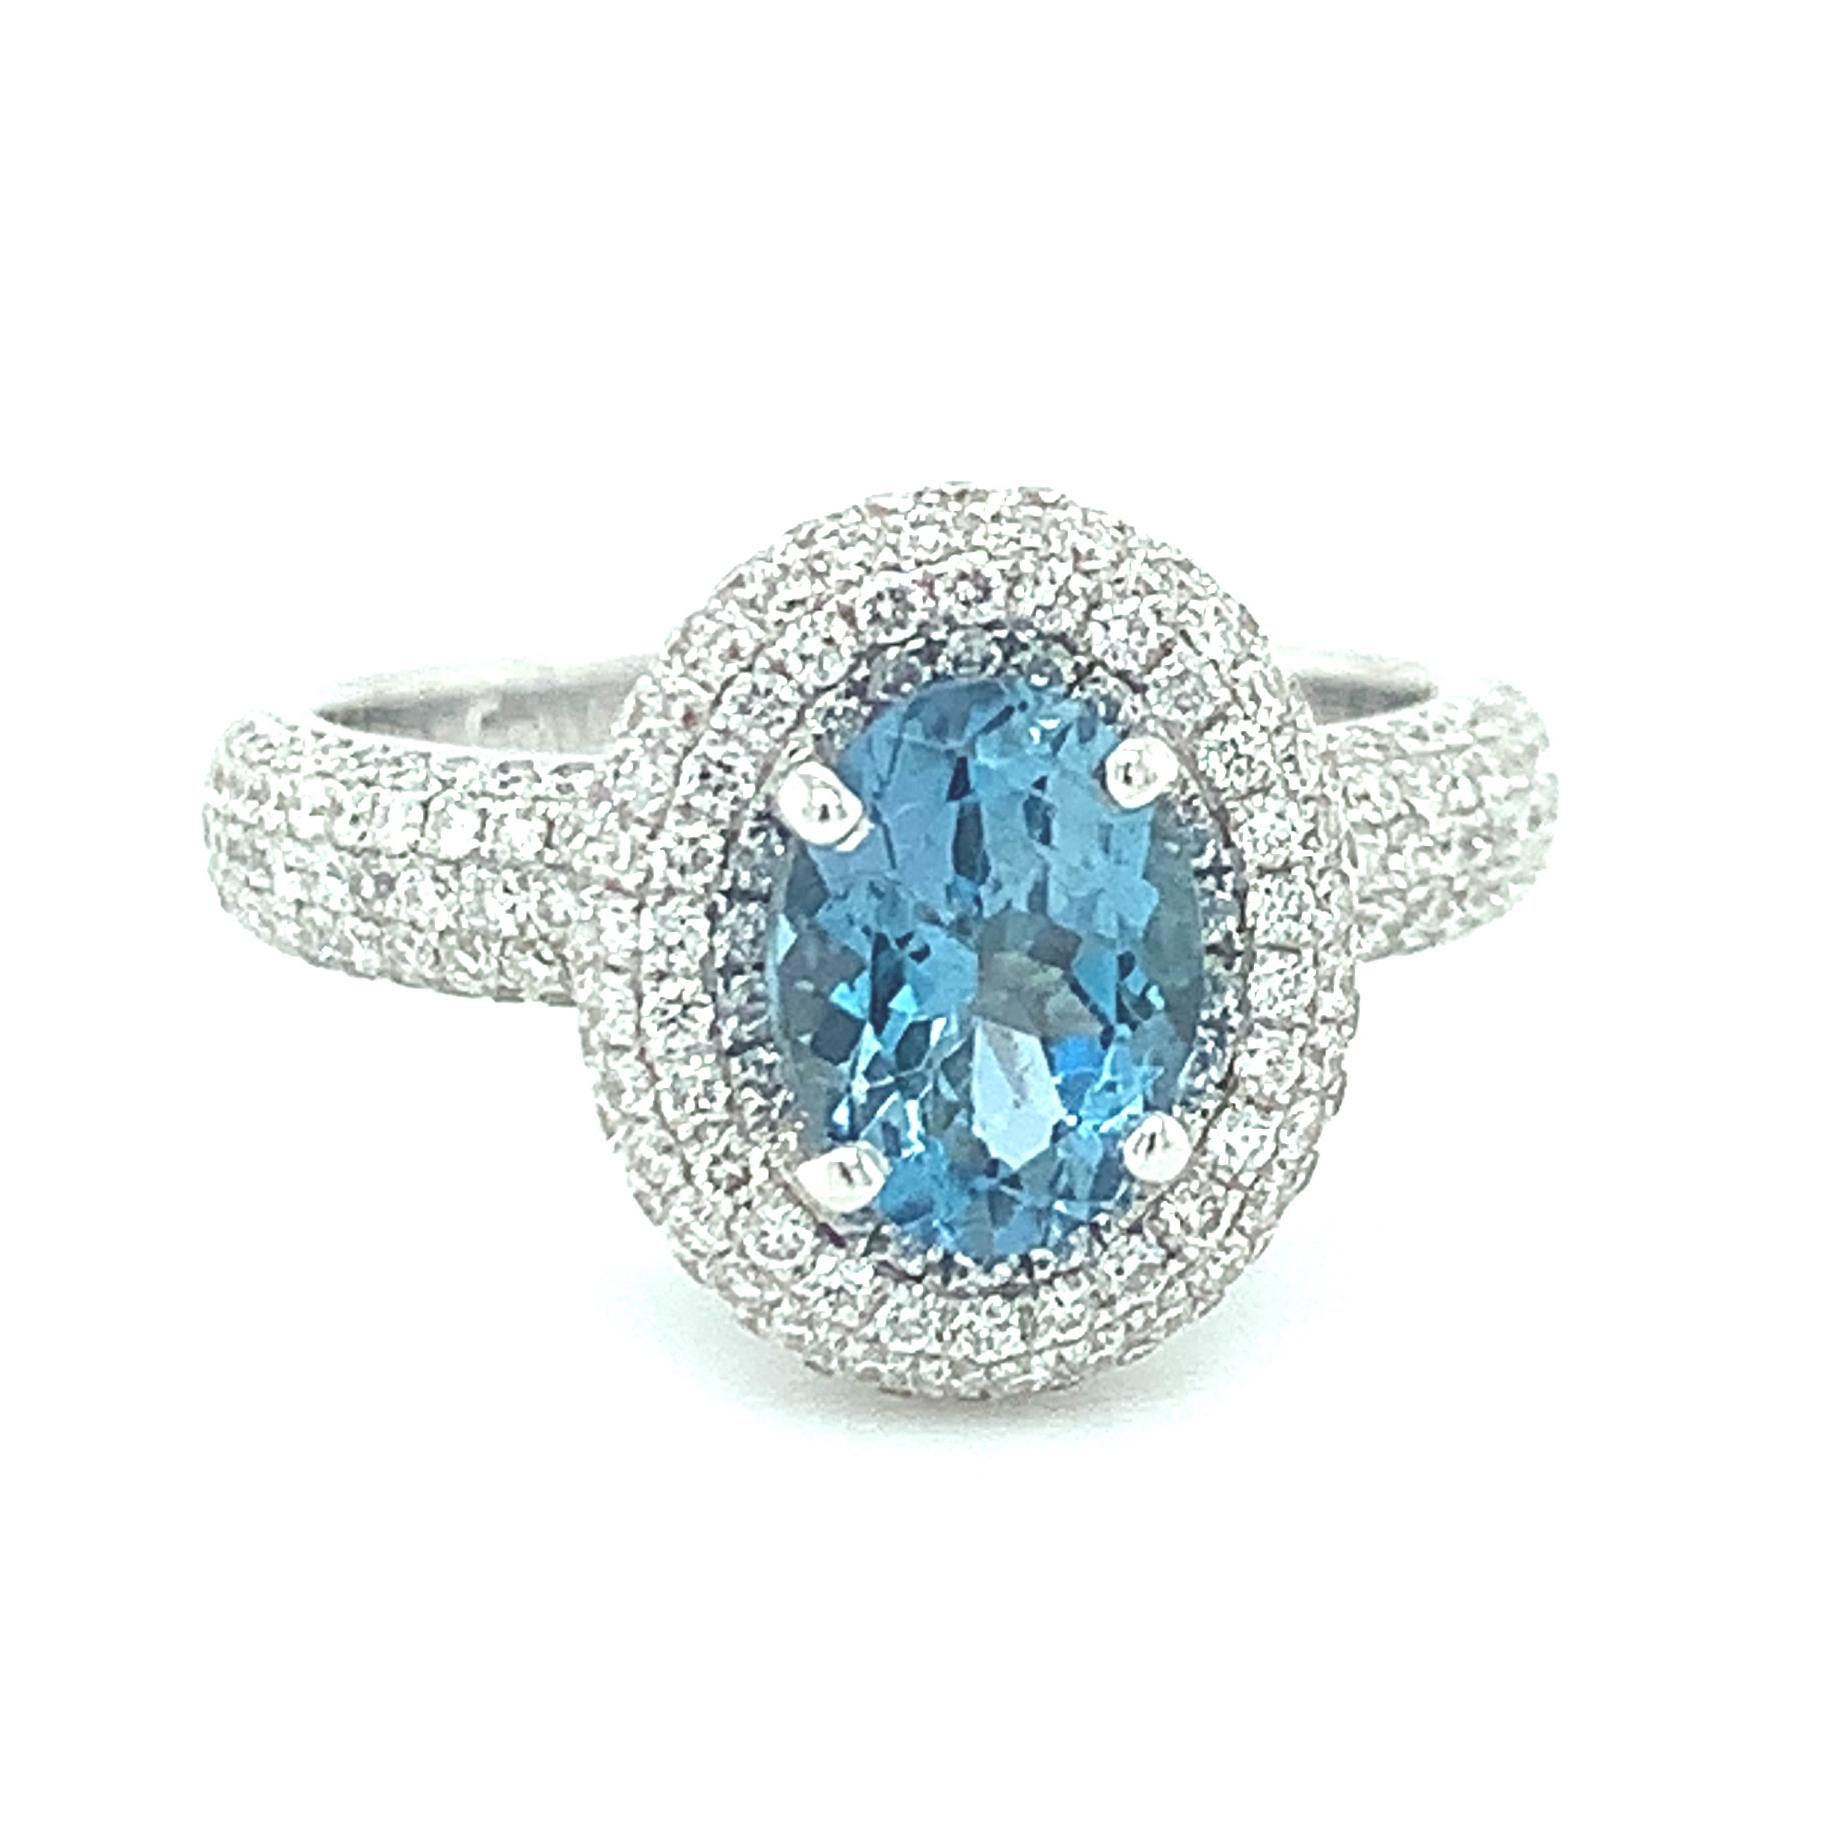 A beautifully deep blue aquamarine takes center stage in this stunning 18k white gold cocktail ring set with over a carat of brilliant white diamonds! The center aquamarine is a sparkling oval with extraordinary life and brilliance. It is surrounded